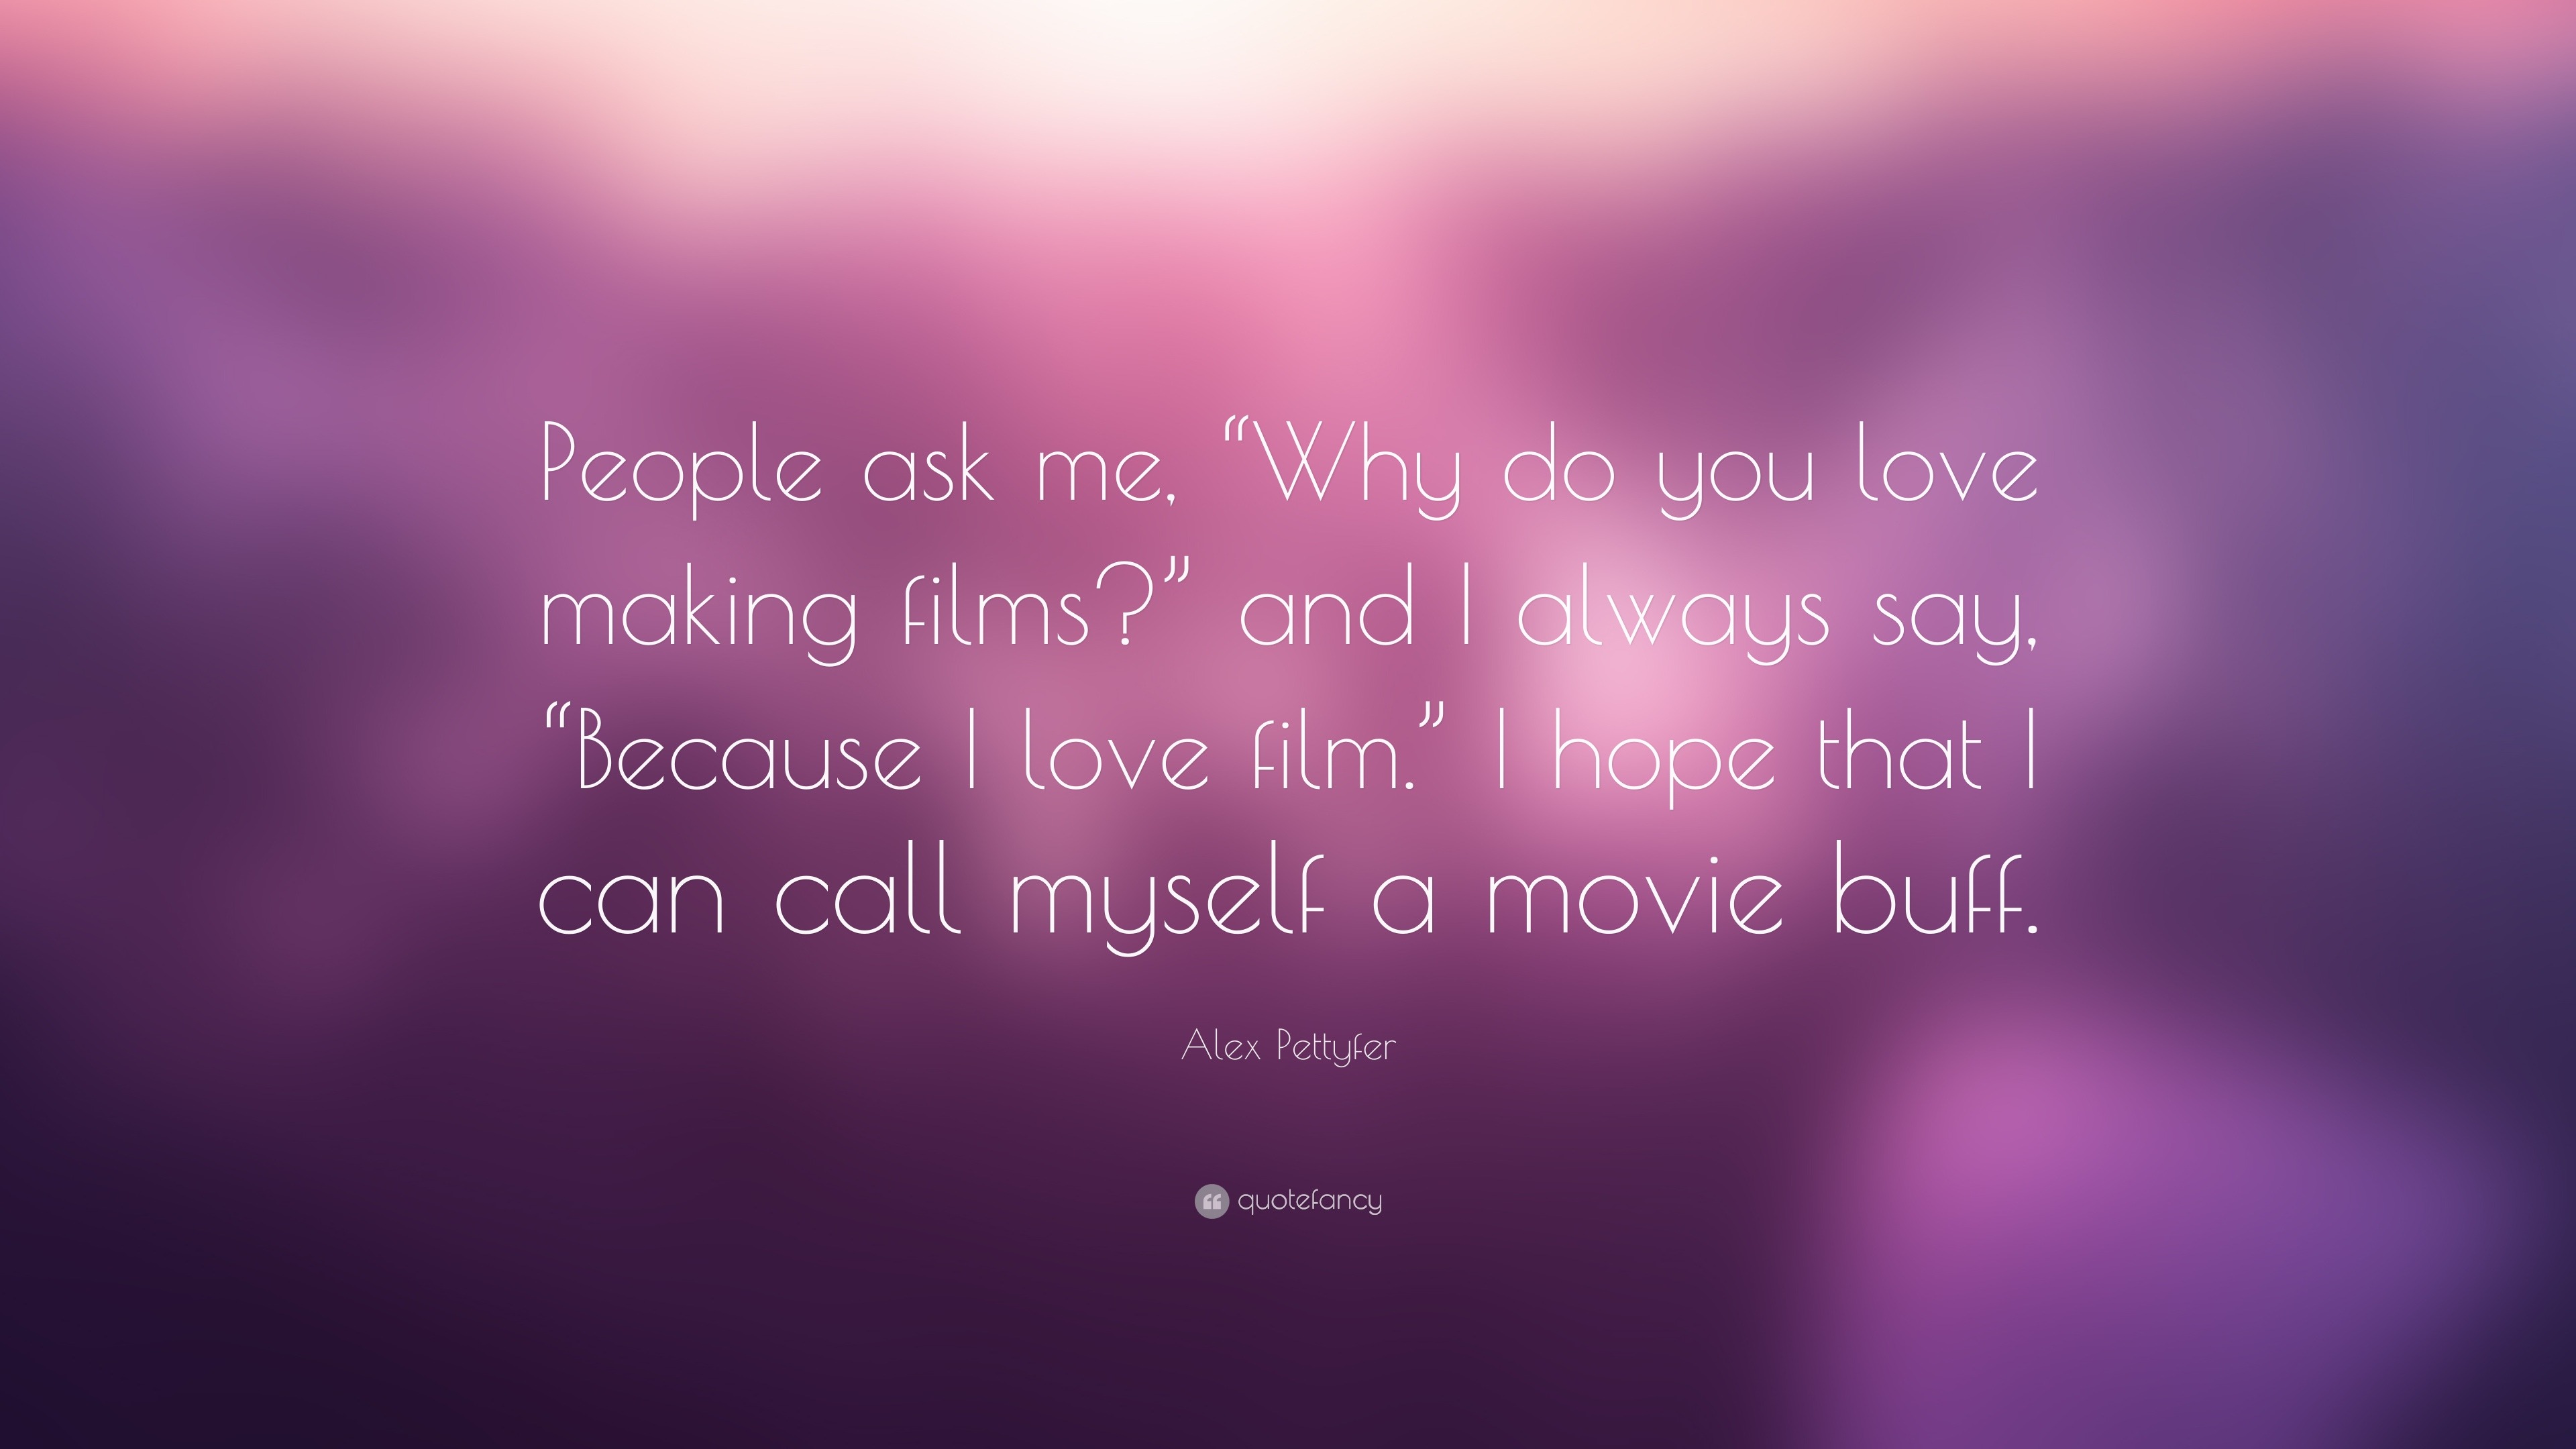 Alex Pettyfer Quote “People ask me “Why do you love making films